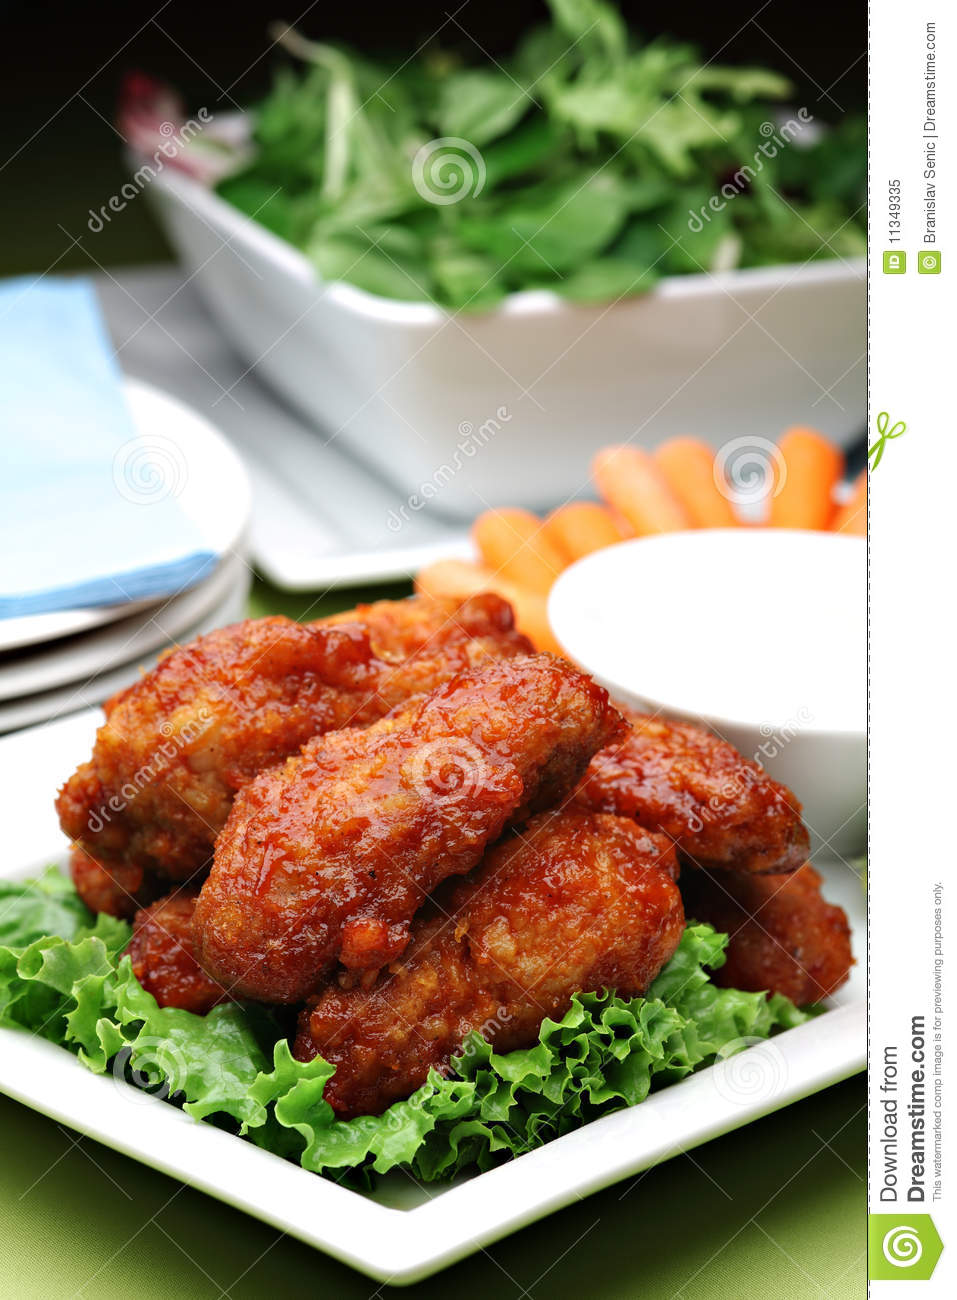 Spicy Buffalo Style Chicken Wings Royalty Free Stock Photo   Image    